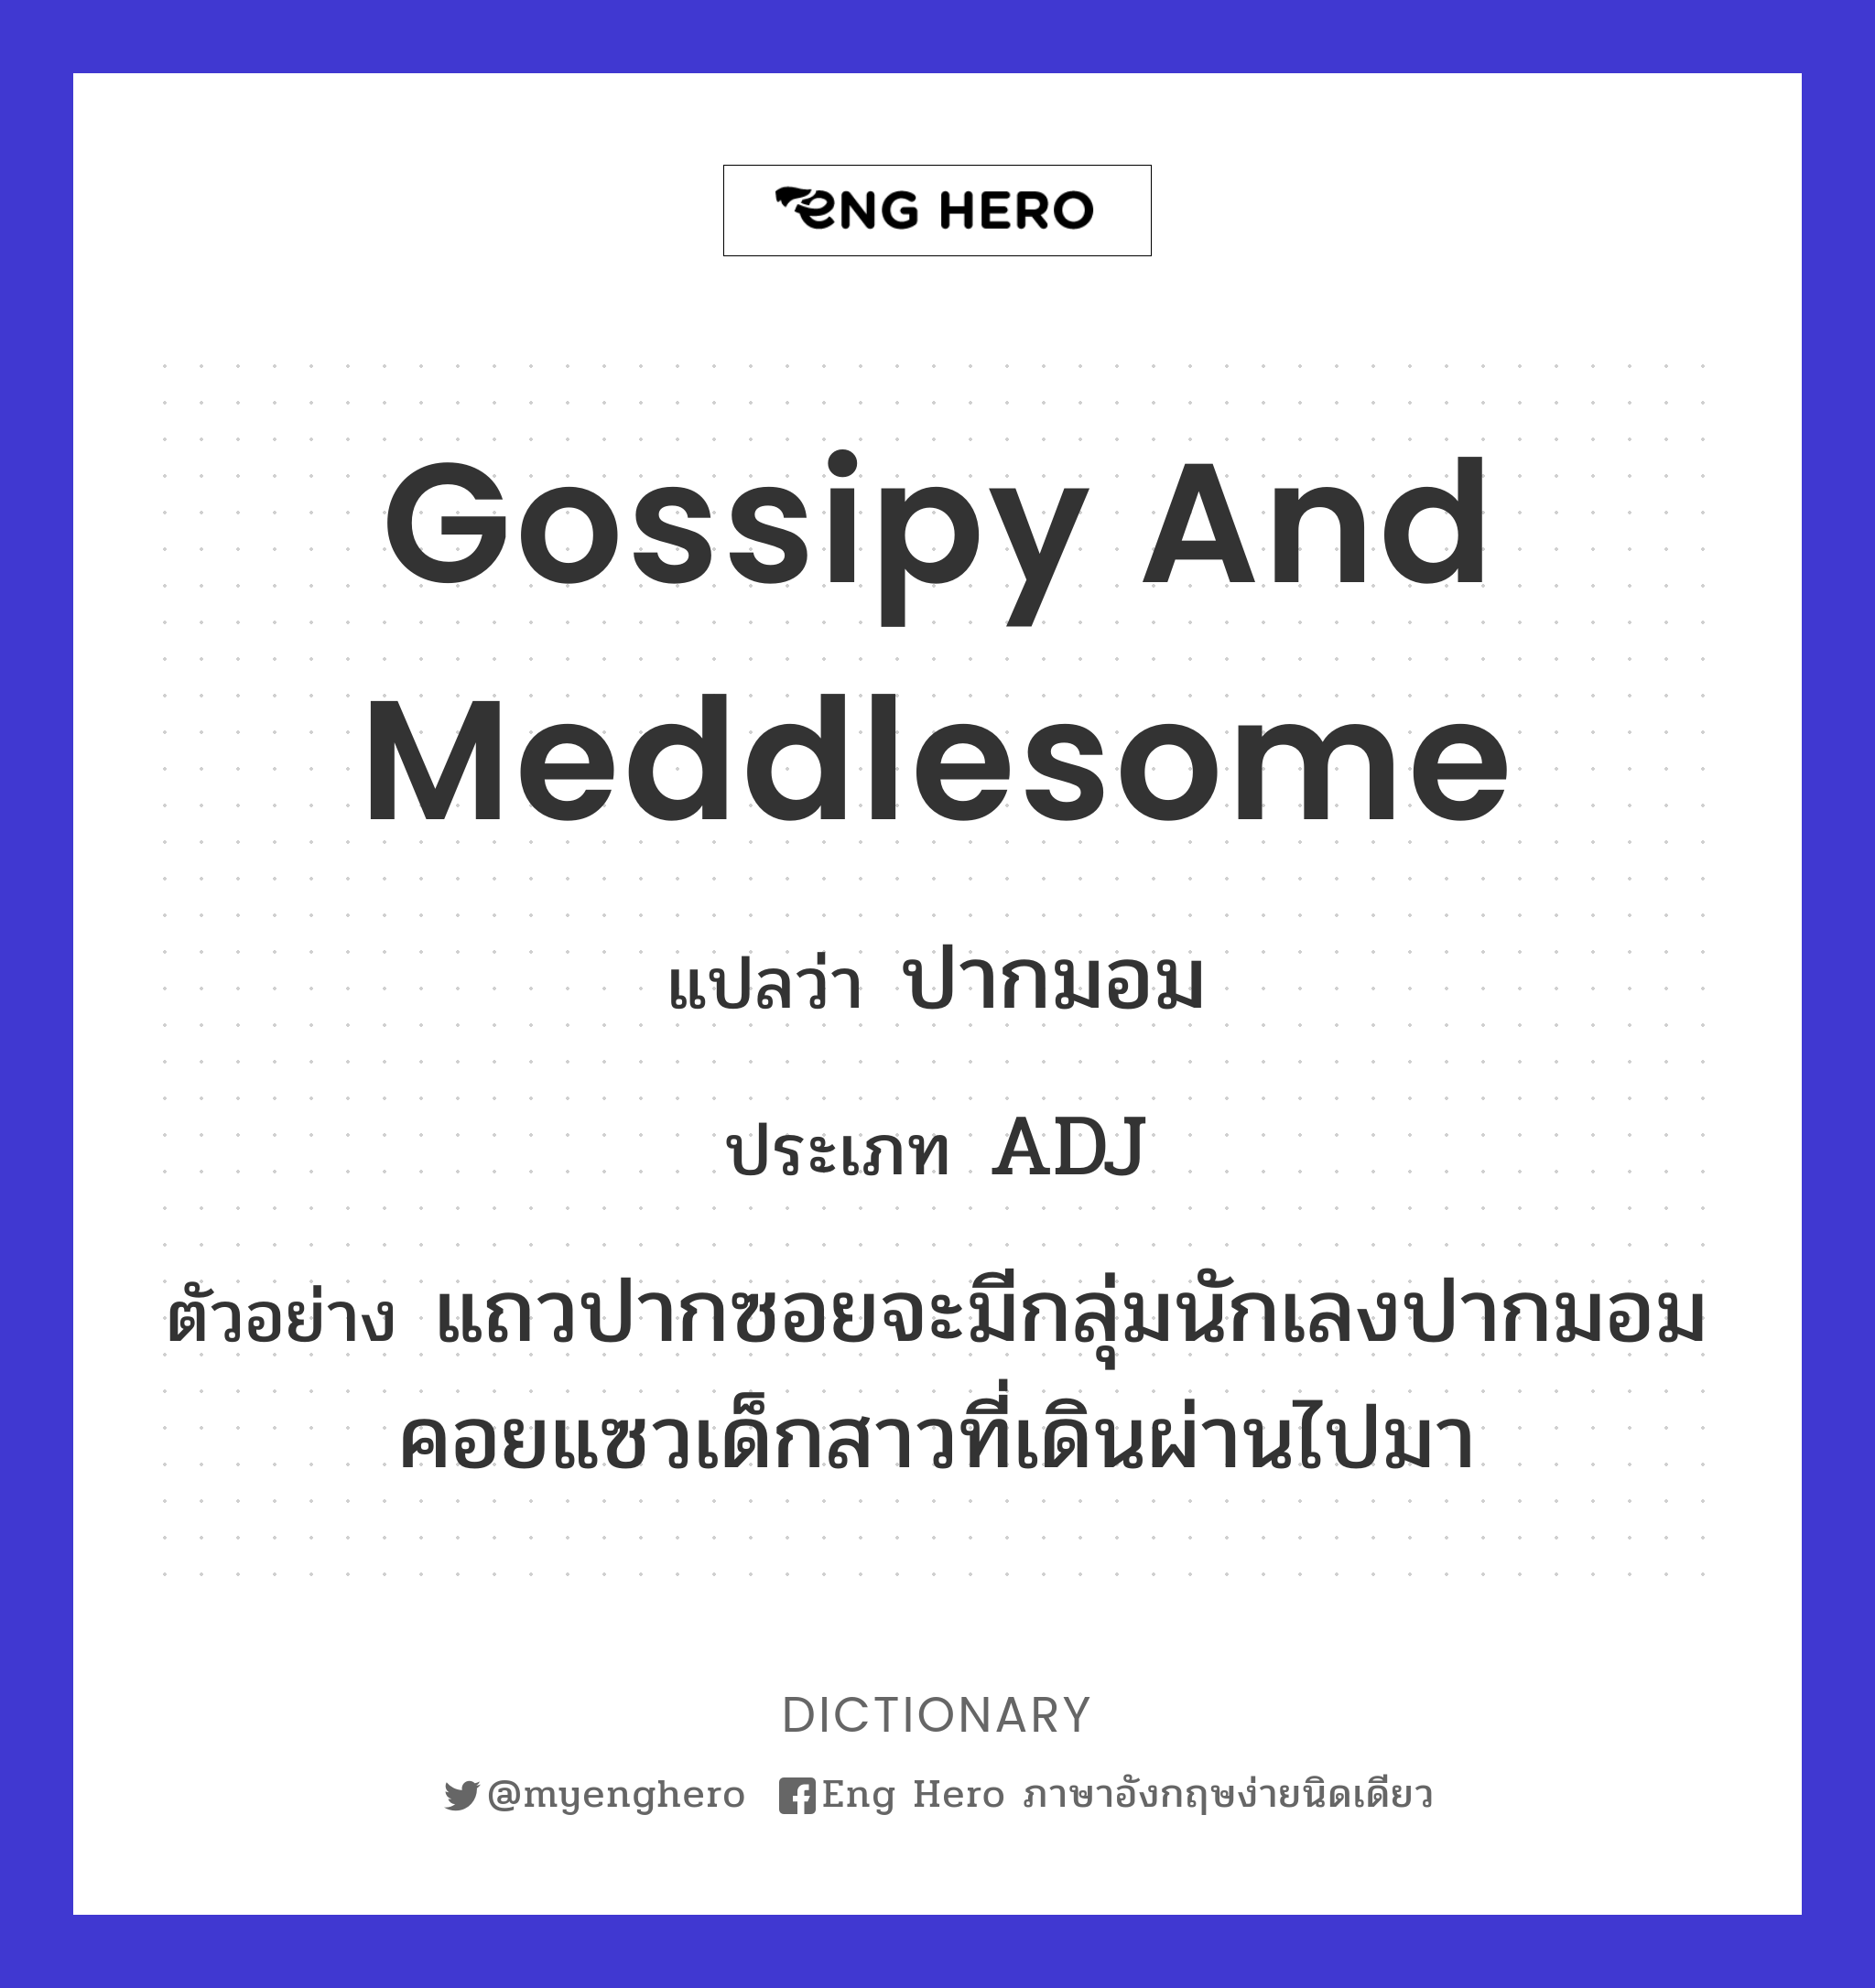 gossipy and meddlesome